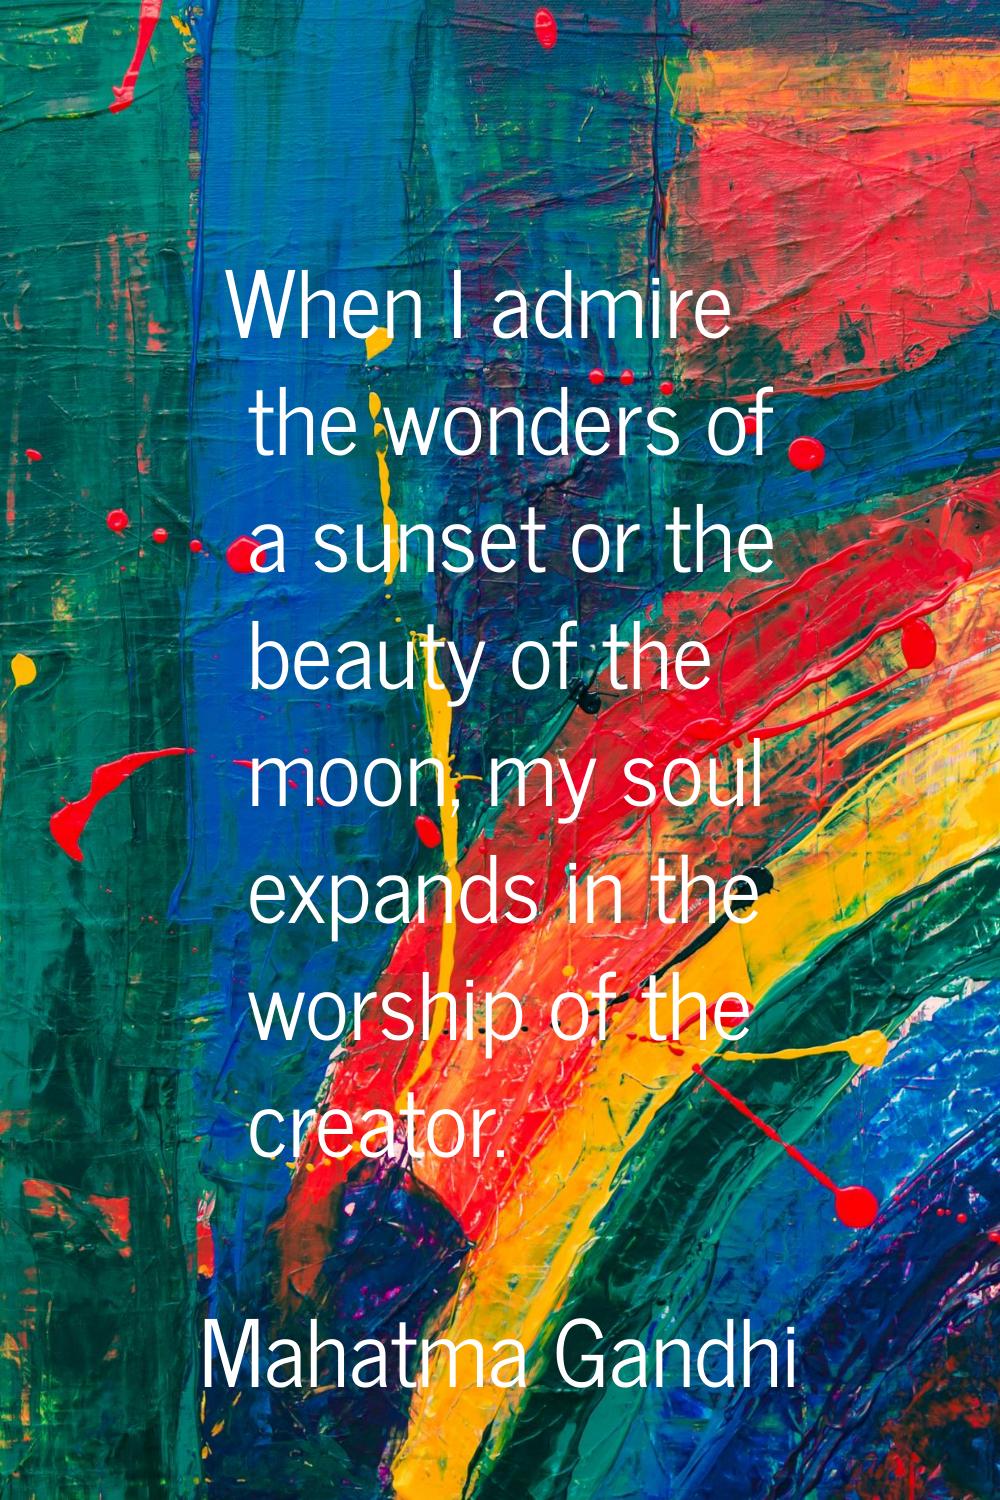 When I admire the wonders of a sunset or the beauty of the moon, my soul expands in the worship of 